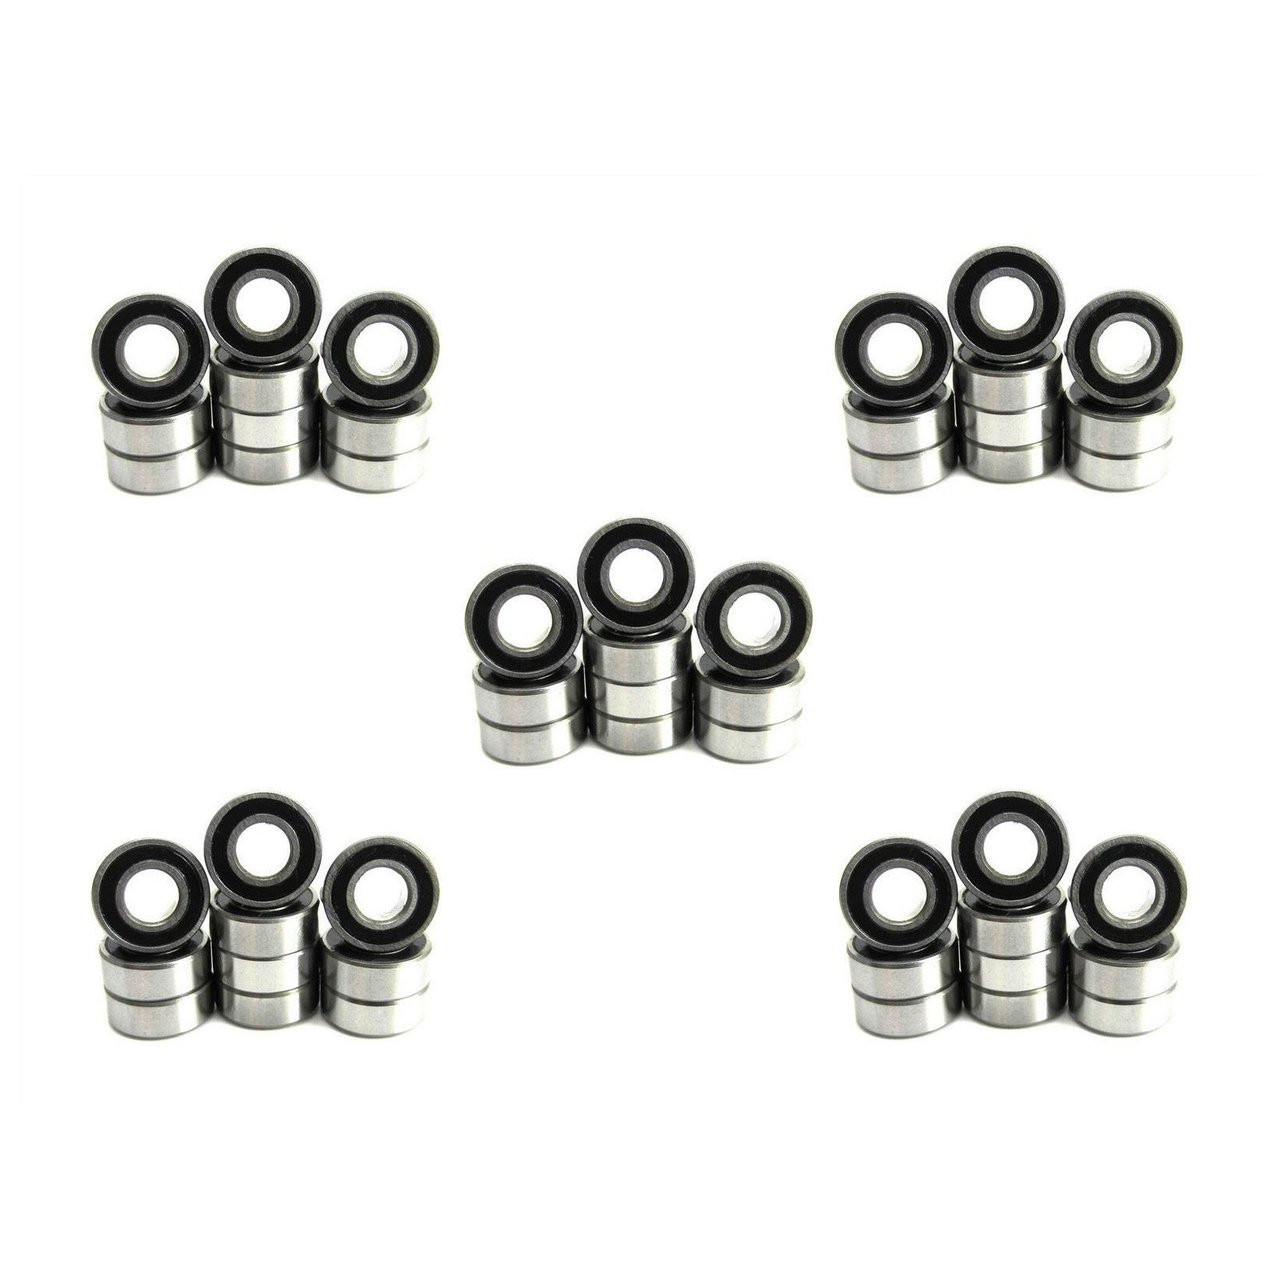 5x11x4mm Precision Ball Bearings ABEC 1 Rubber Sealed (50)